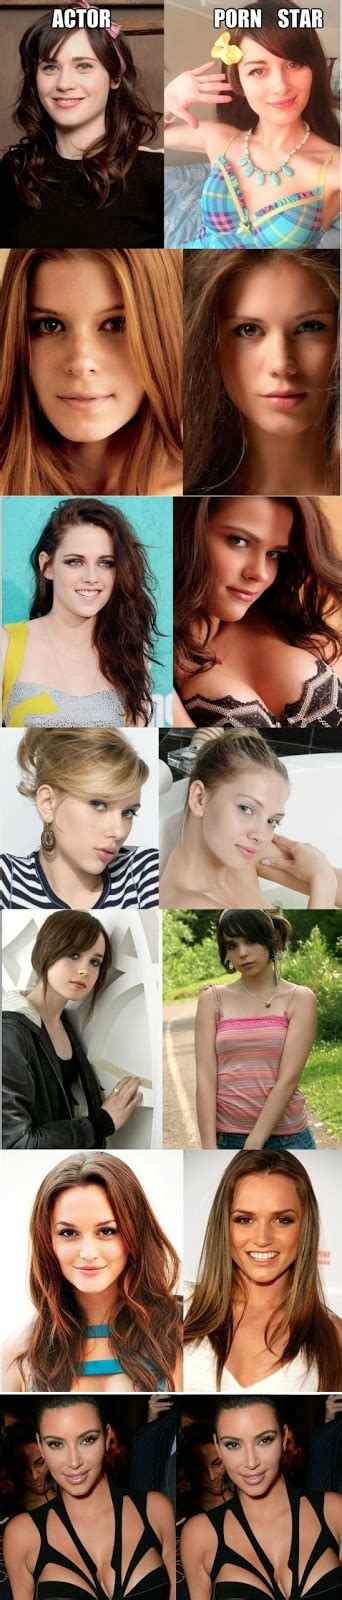 Actresses And Their Porn Star Doubles Cinehub